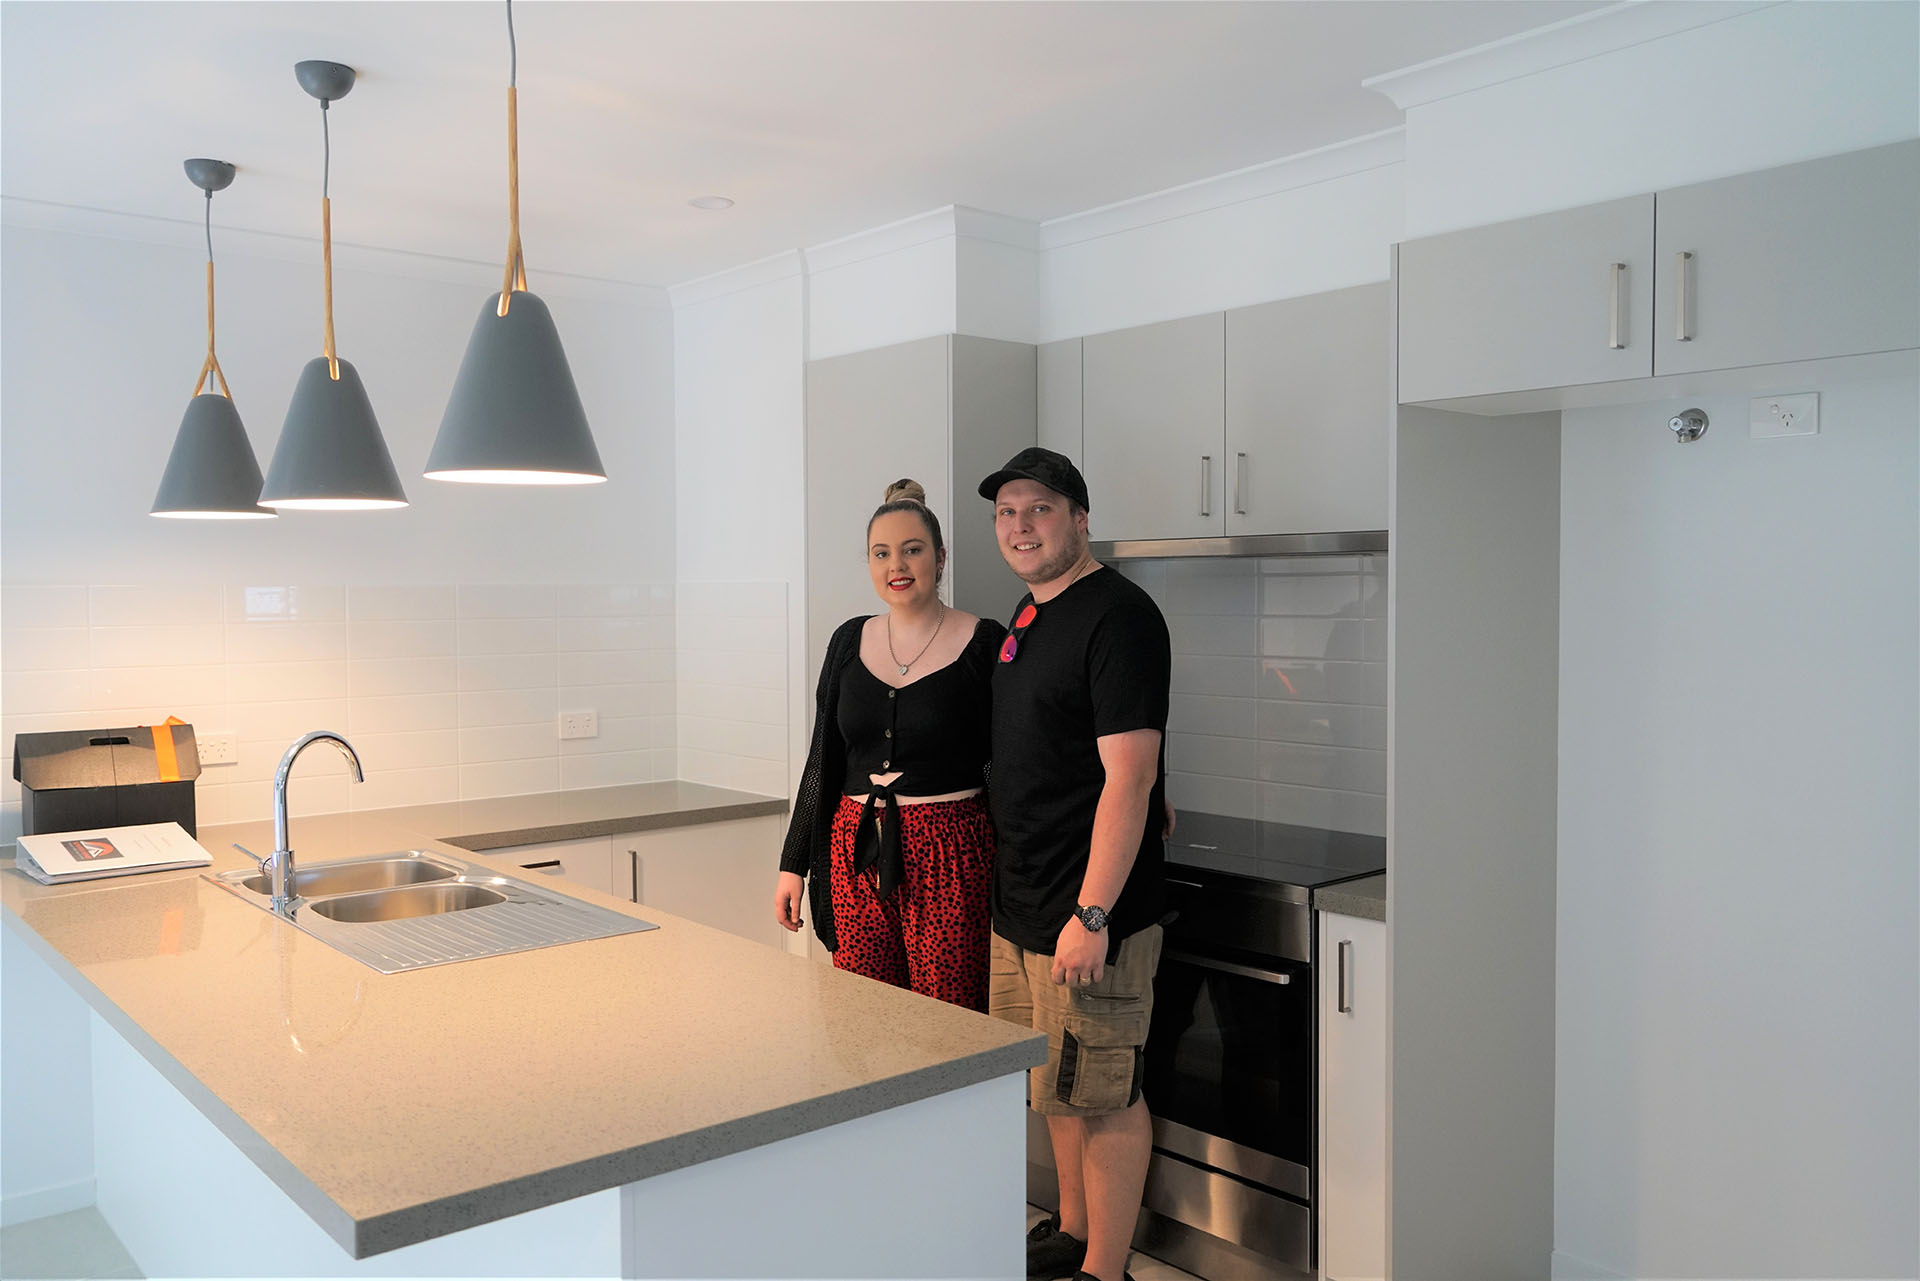 No or Low Deposit New Home Solutions Townsville - No1 Property Guide